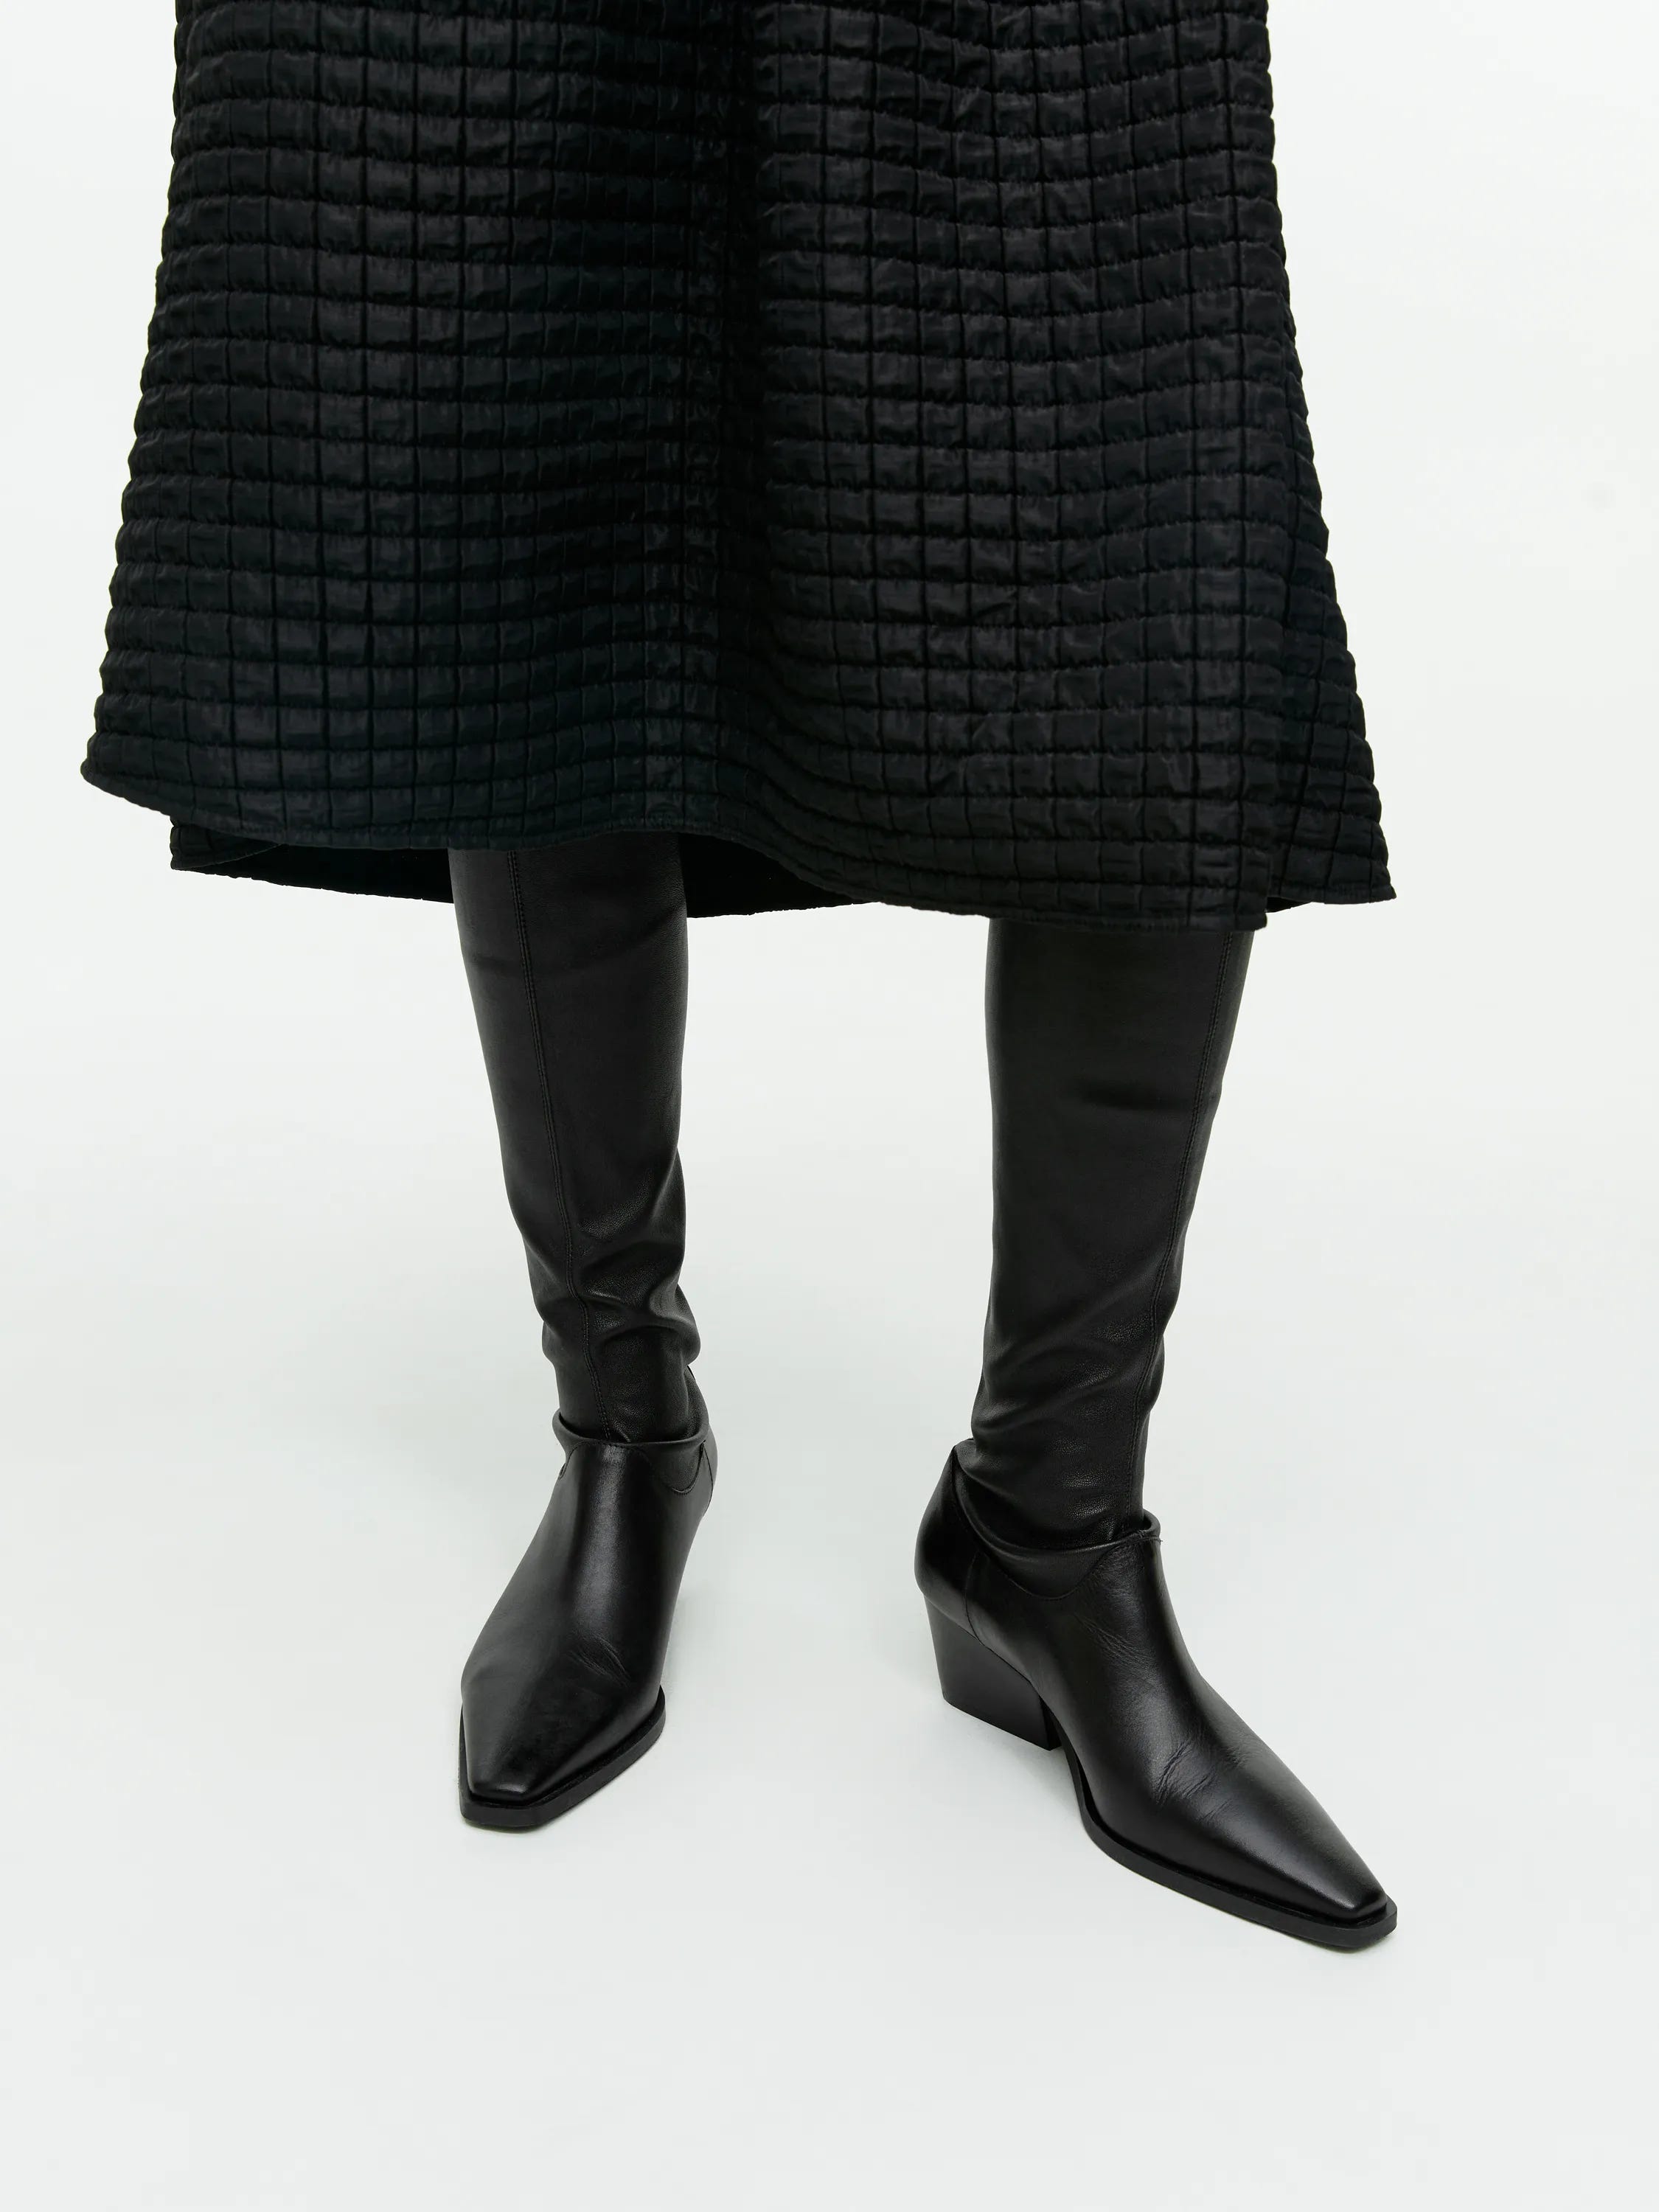 The Most Functional & Versatile Boot - by Irene Kim (김애린)